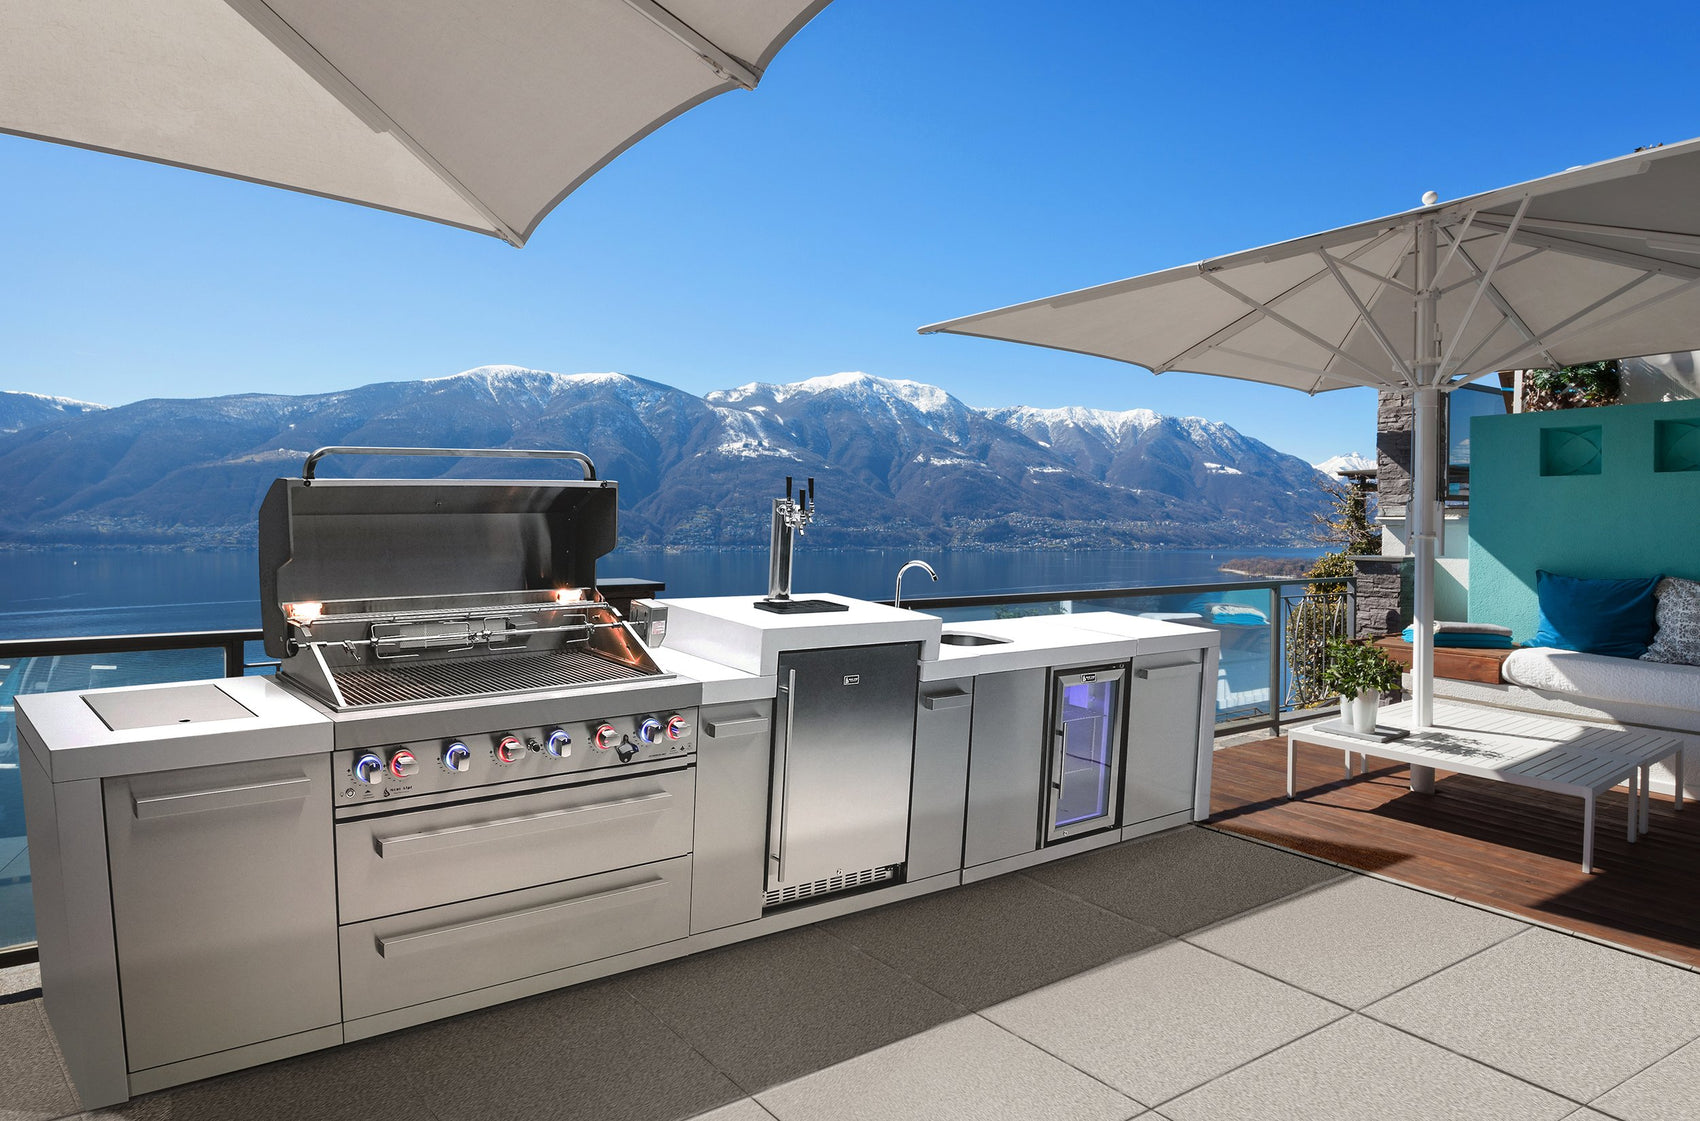 BBQ Islands Everything You Need to Know: An All-In-One Outdoor Kitchen Solution